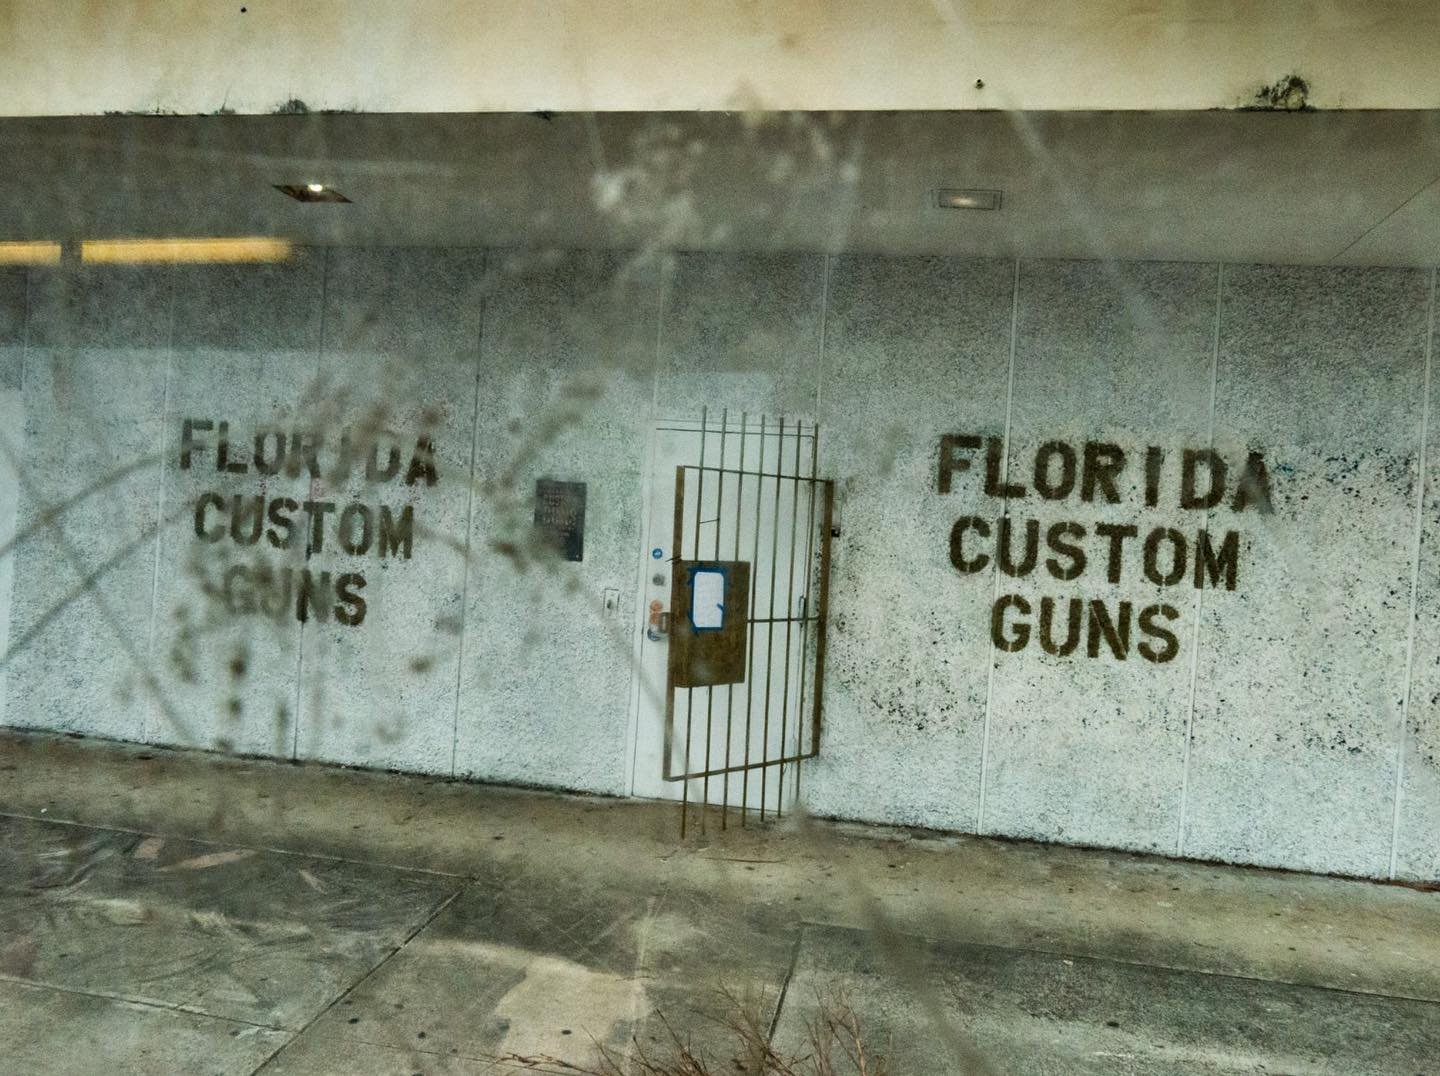 Florida Custom Guns. Miami, Florida. 2020..
.
From the series Miami Buzz | The Buzz Project.
.
The Buzz Project [2010-2024]
Is a monumental body of photographic work centered on the contemporary metropolis, the urban environment, and its infinite lay